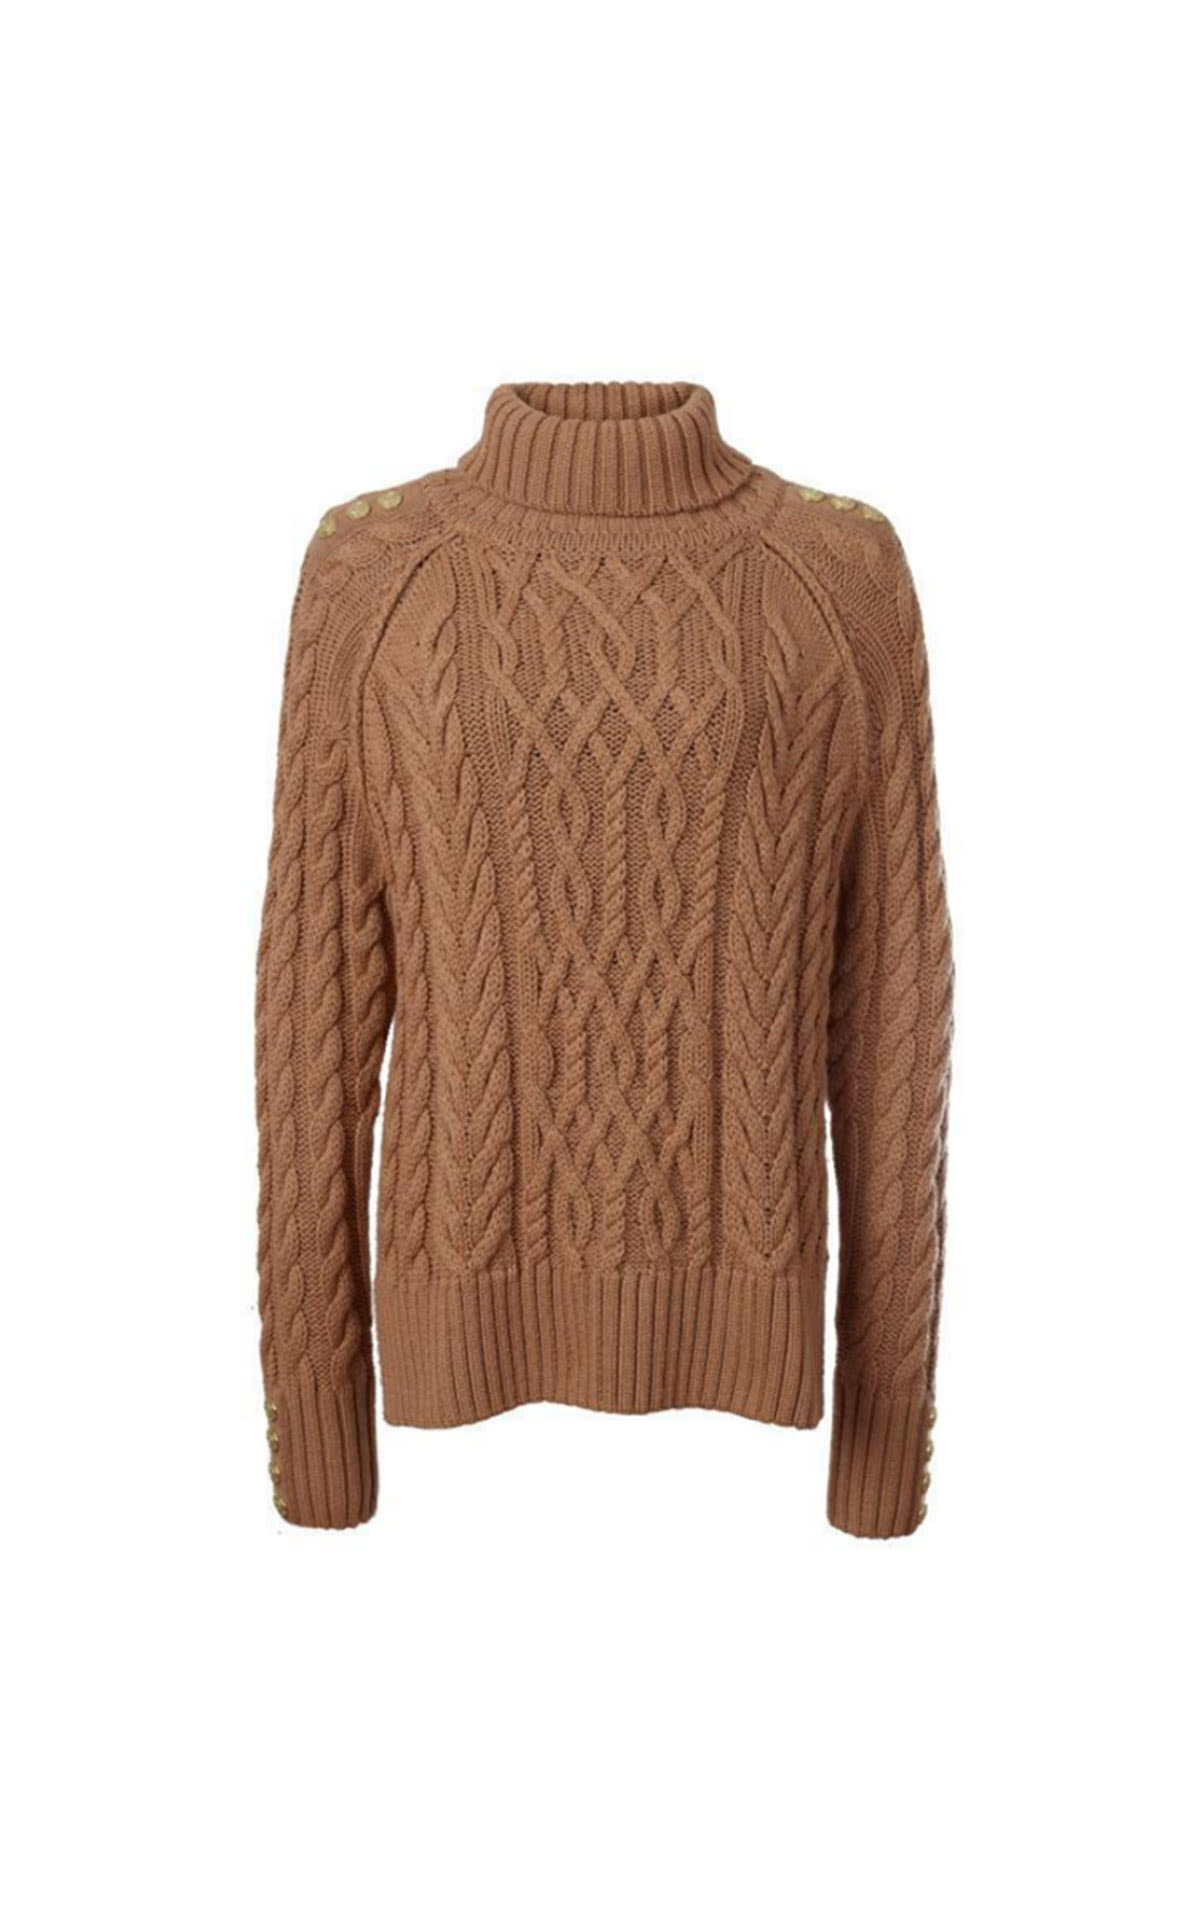 Holland Cooper Greenwich cable knit from Bicester Village